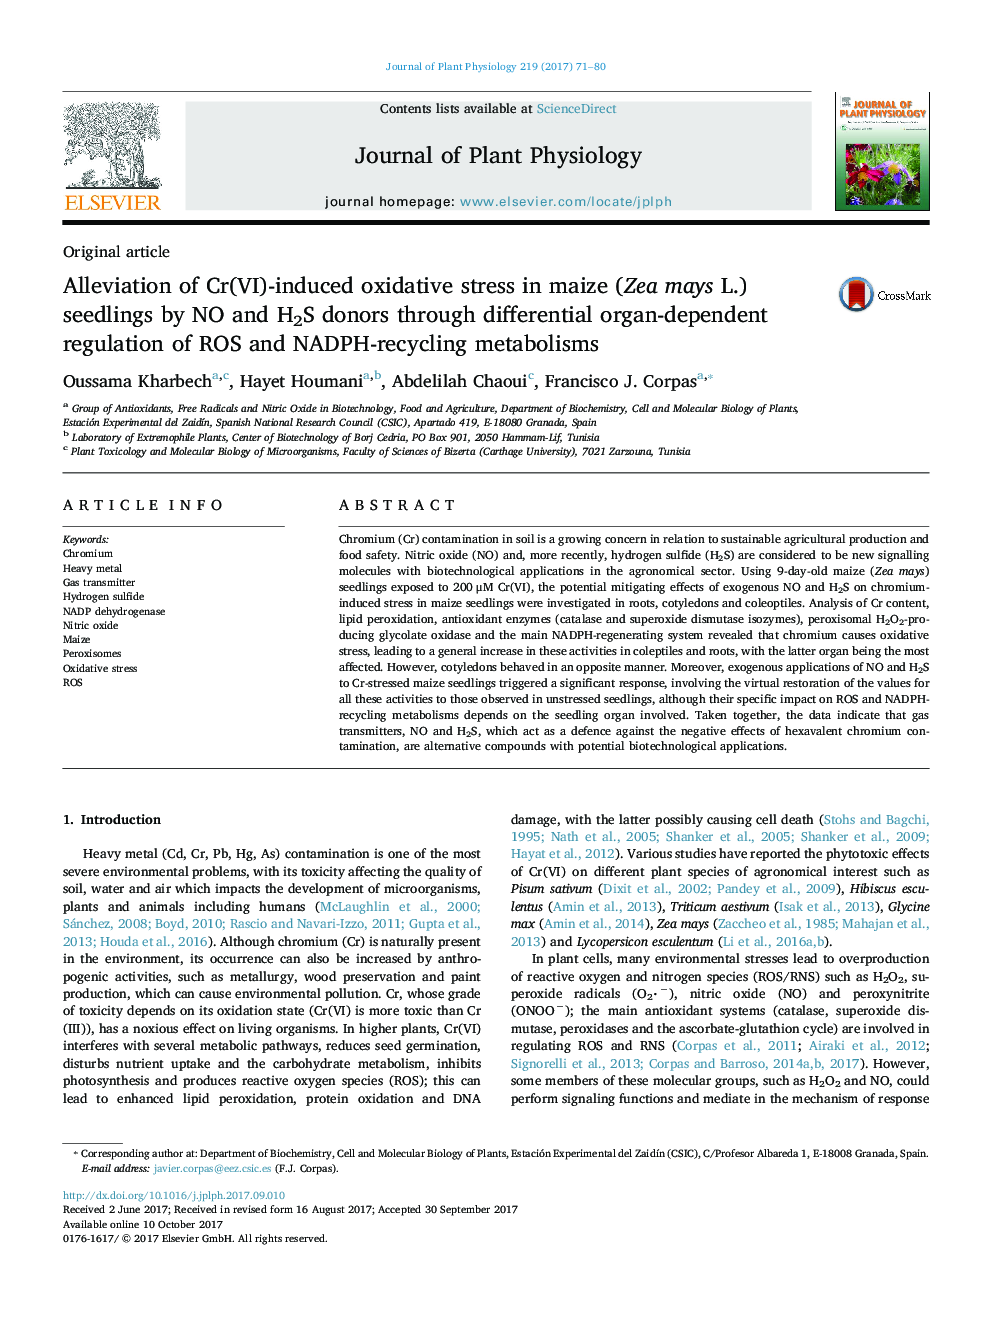 Original articleAlleviation of Cr(VI)-induced oxidative stress in maize (Zea mays L.) seedlings by NO and H2S donors through differential organ-dependent regulation of ROS and NADPH-recycling metabolisms